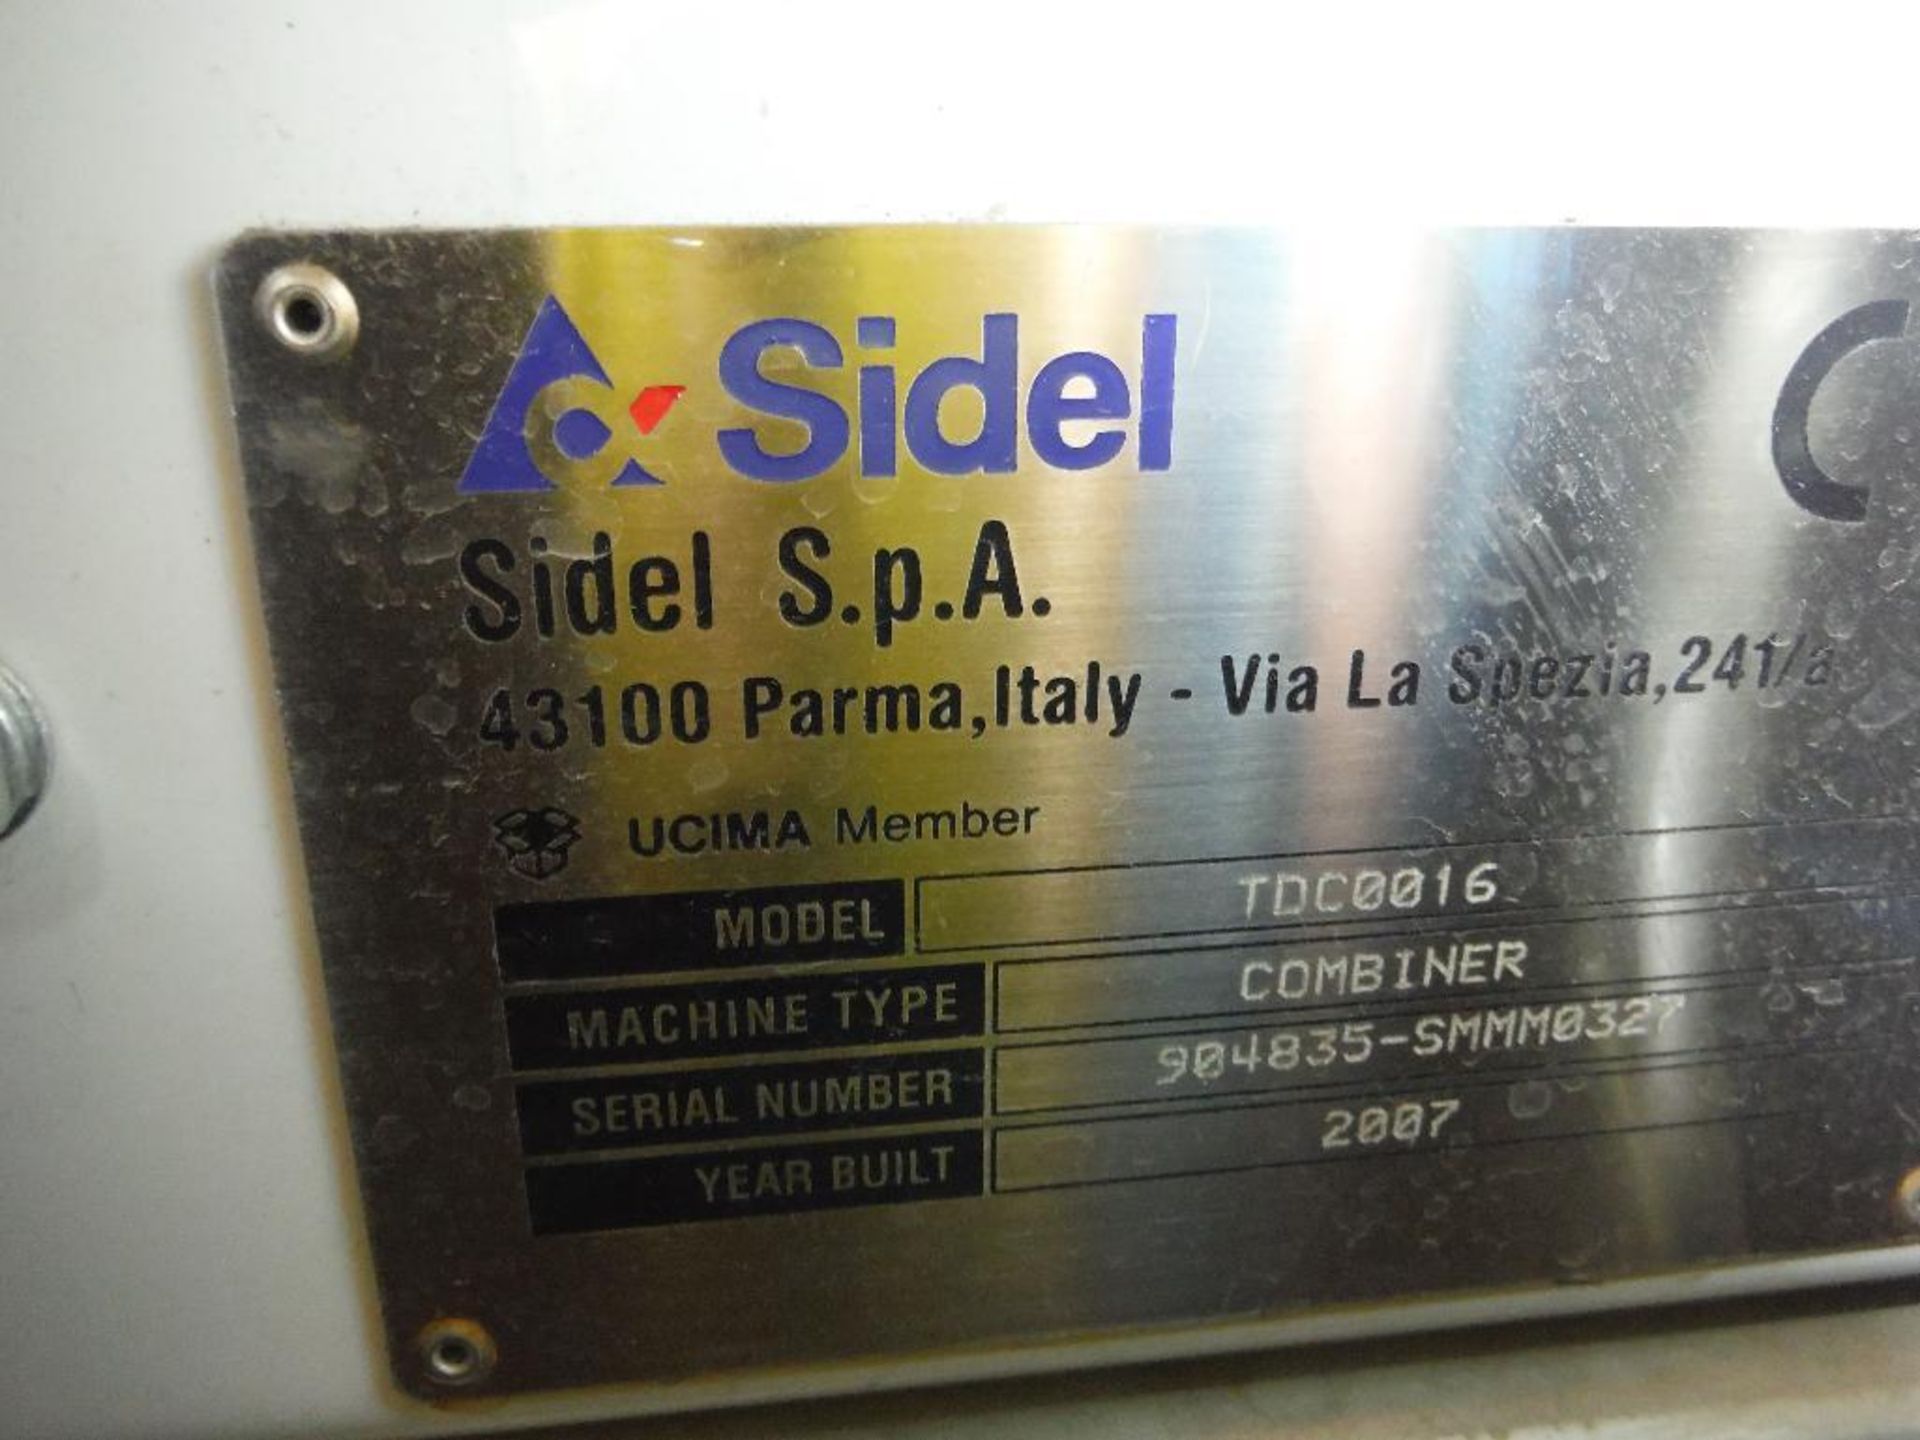 2007 Sidel combiner conveyor, Model TDC0016, SN 904835-SMMM0327, 98 in. long x 66 in. wide, with con - Bild 11 aus 11